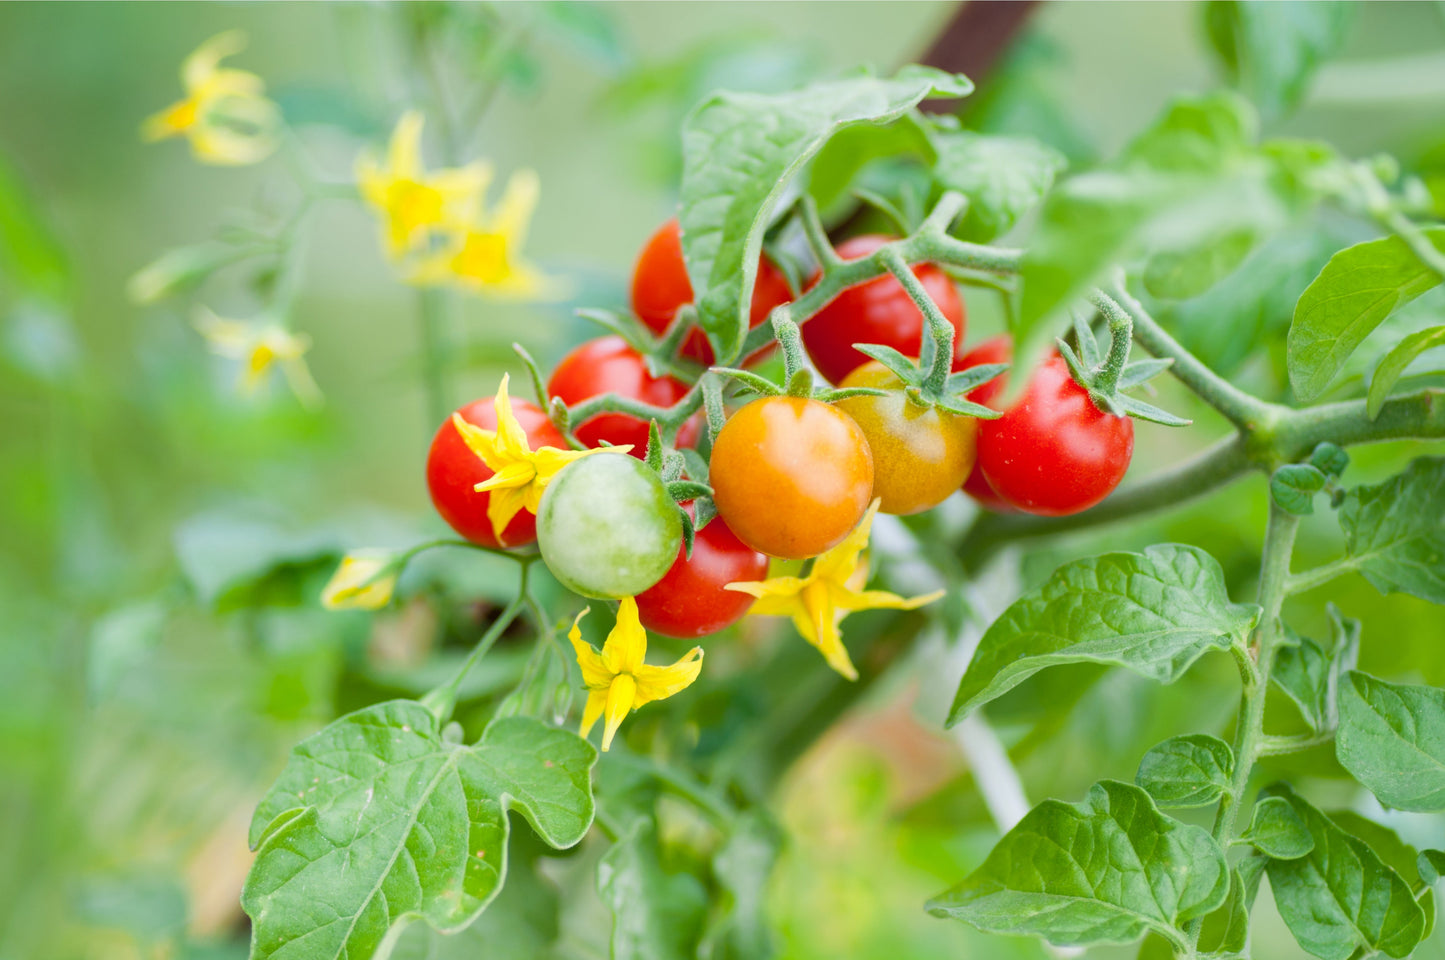 Tomato 'Tumbling Tom Red' - 1 x Large Plant in a 9cm Pot